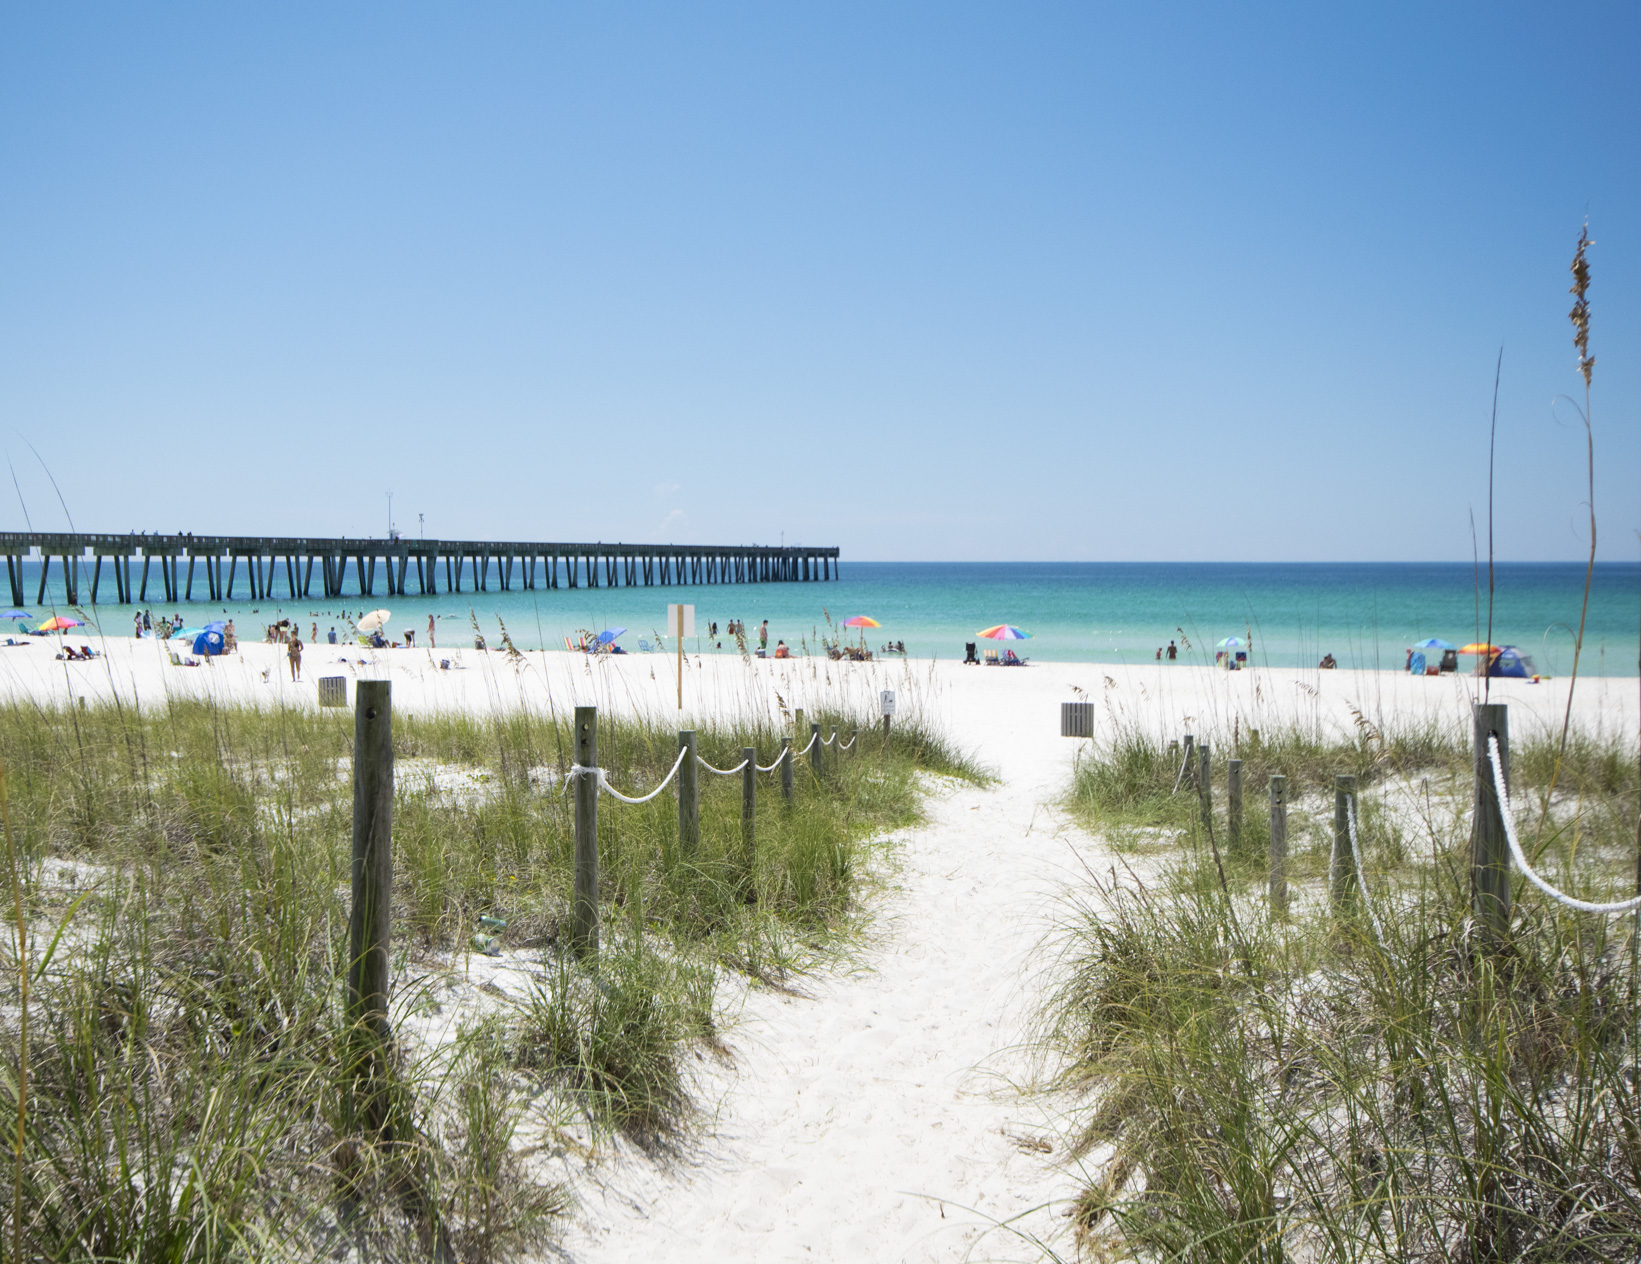 Check Out Our Panama City Beach Vacation Rentals ...